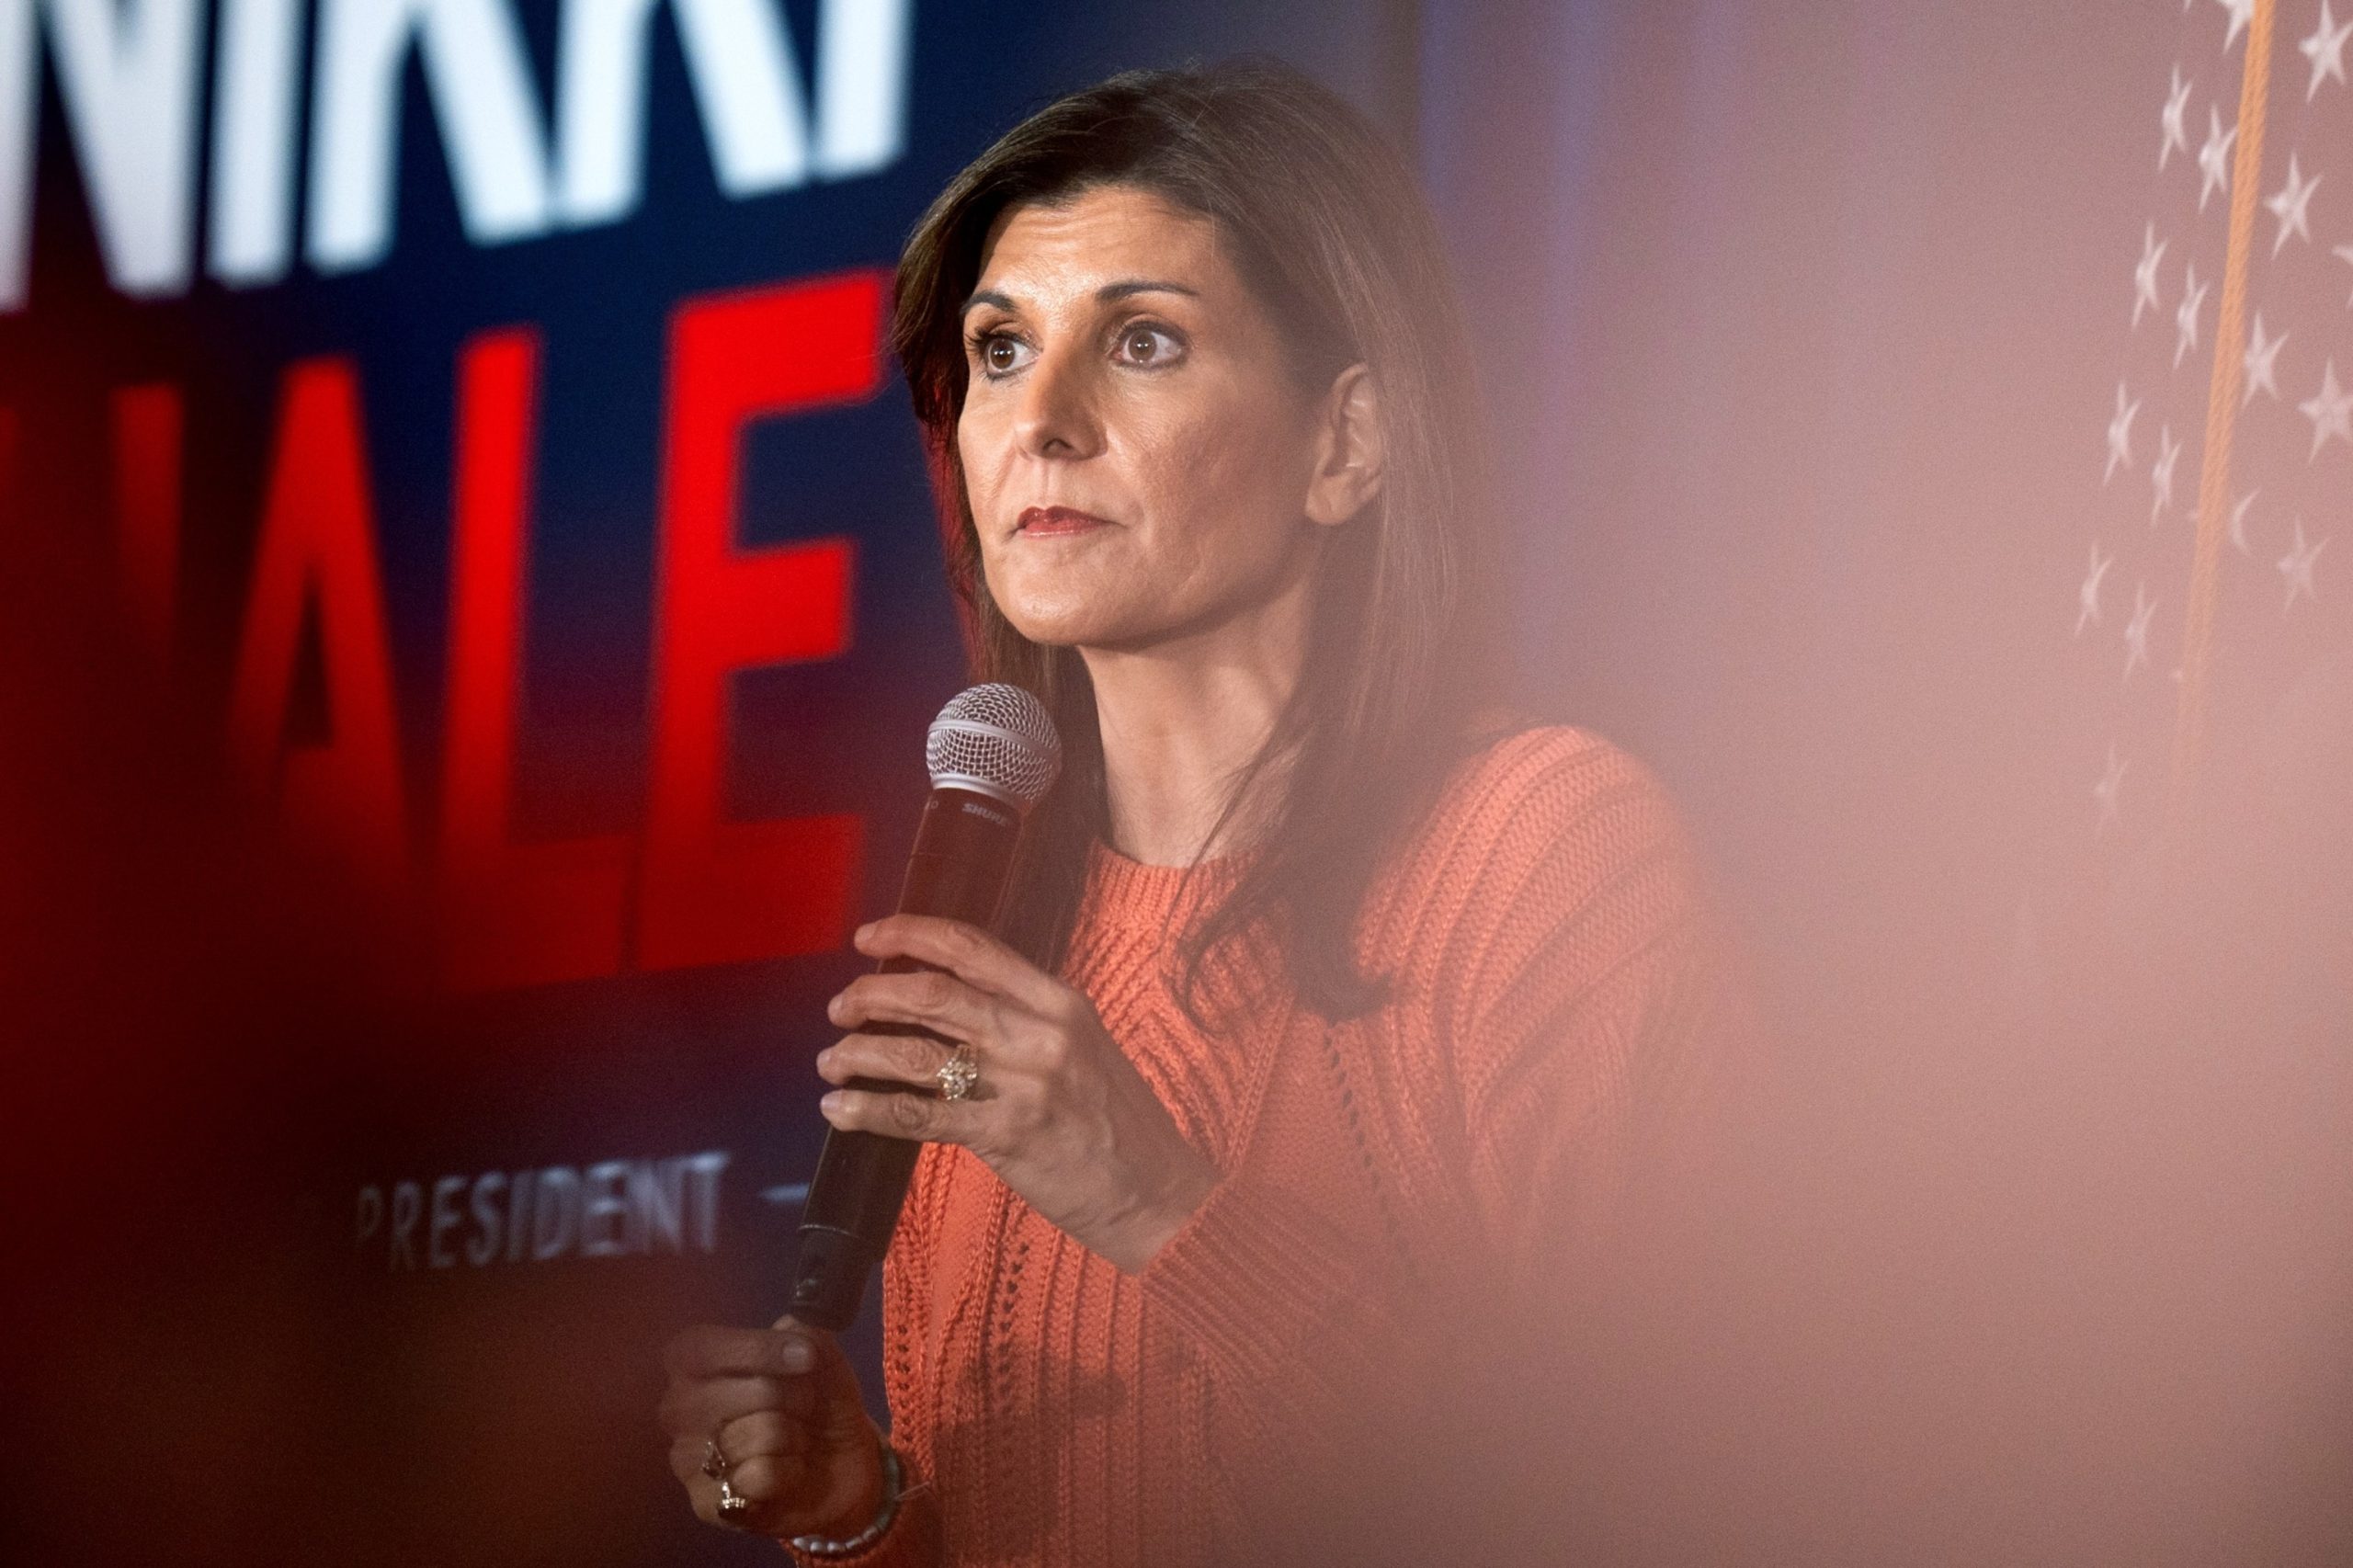 Sources report that Nikki Haley will be ending her presidential campaign, making her the last major Trump rival to exit the GOP race.